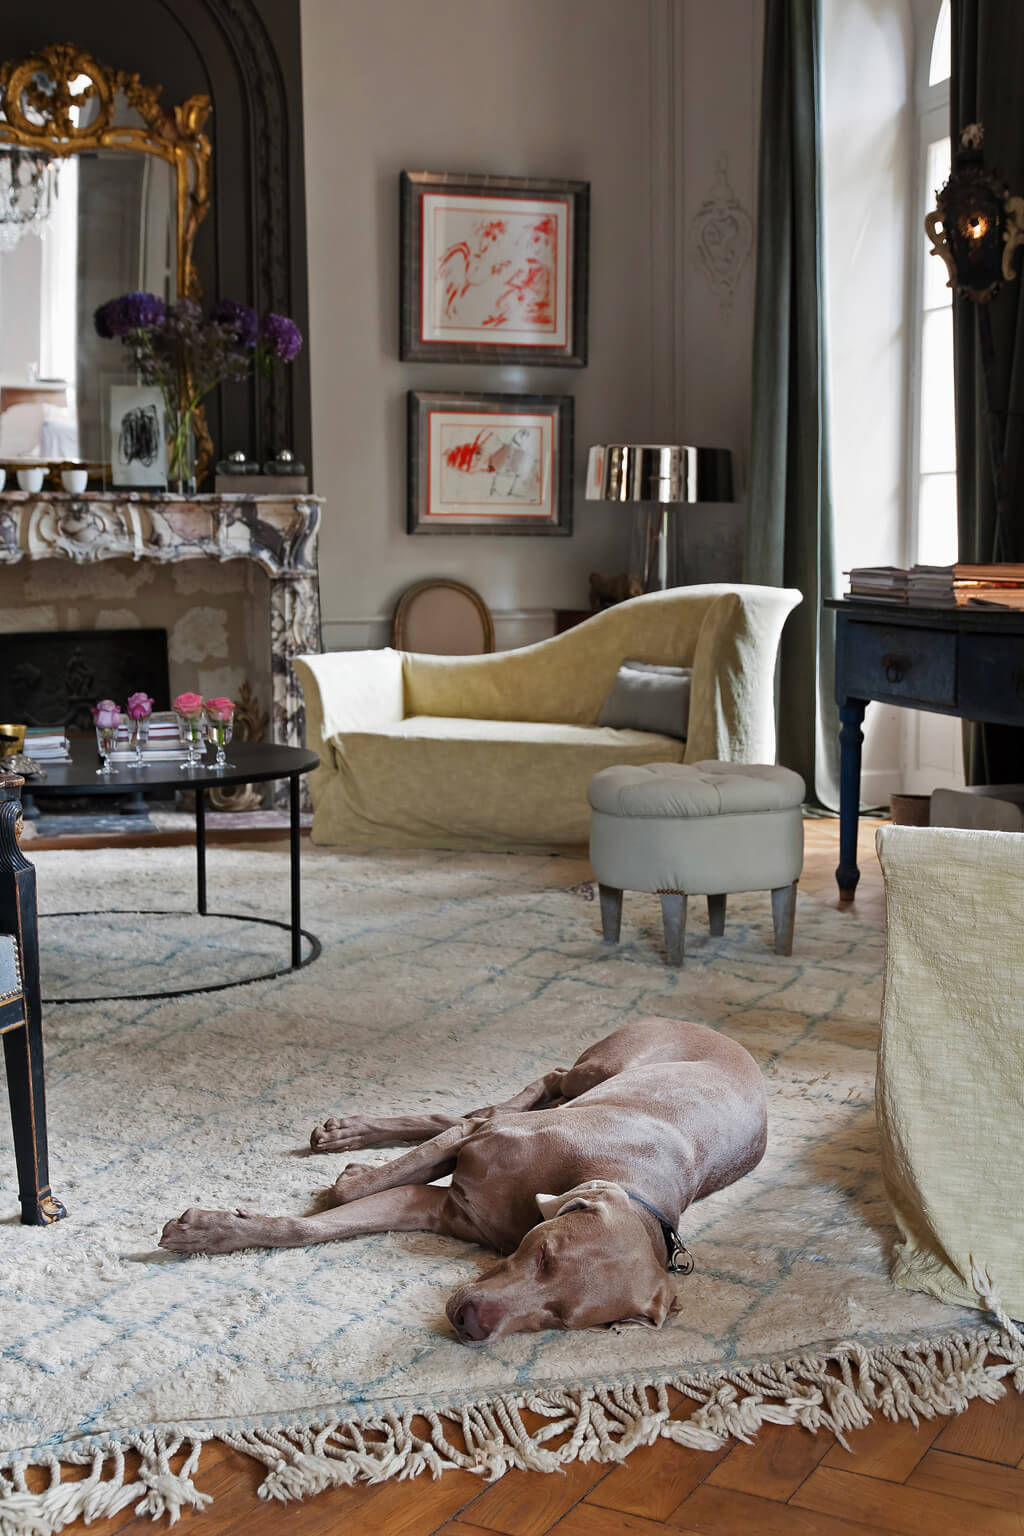 Salon in an Avignon mansion with a sleeping dog. Come see a Breathtaking French Château Tour in Provence With Photo Gallery of Historical Architecture, Dramatic Eclectic Interiors & Oddities!